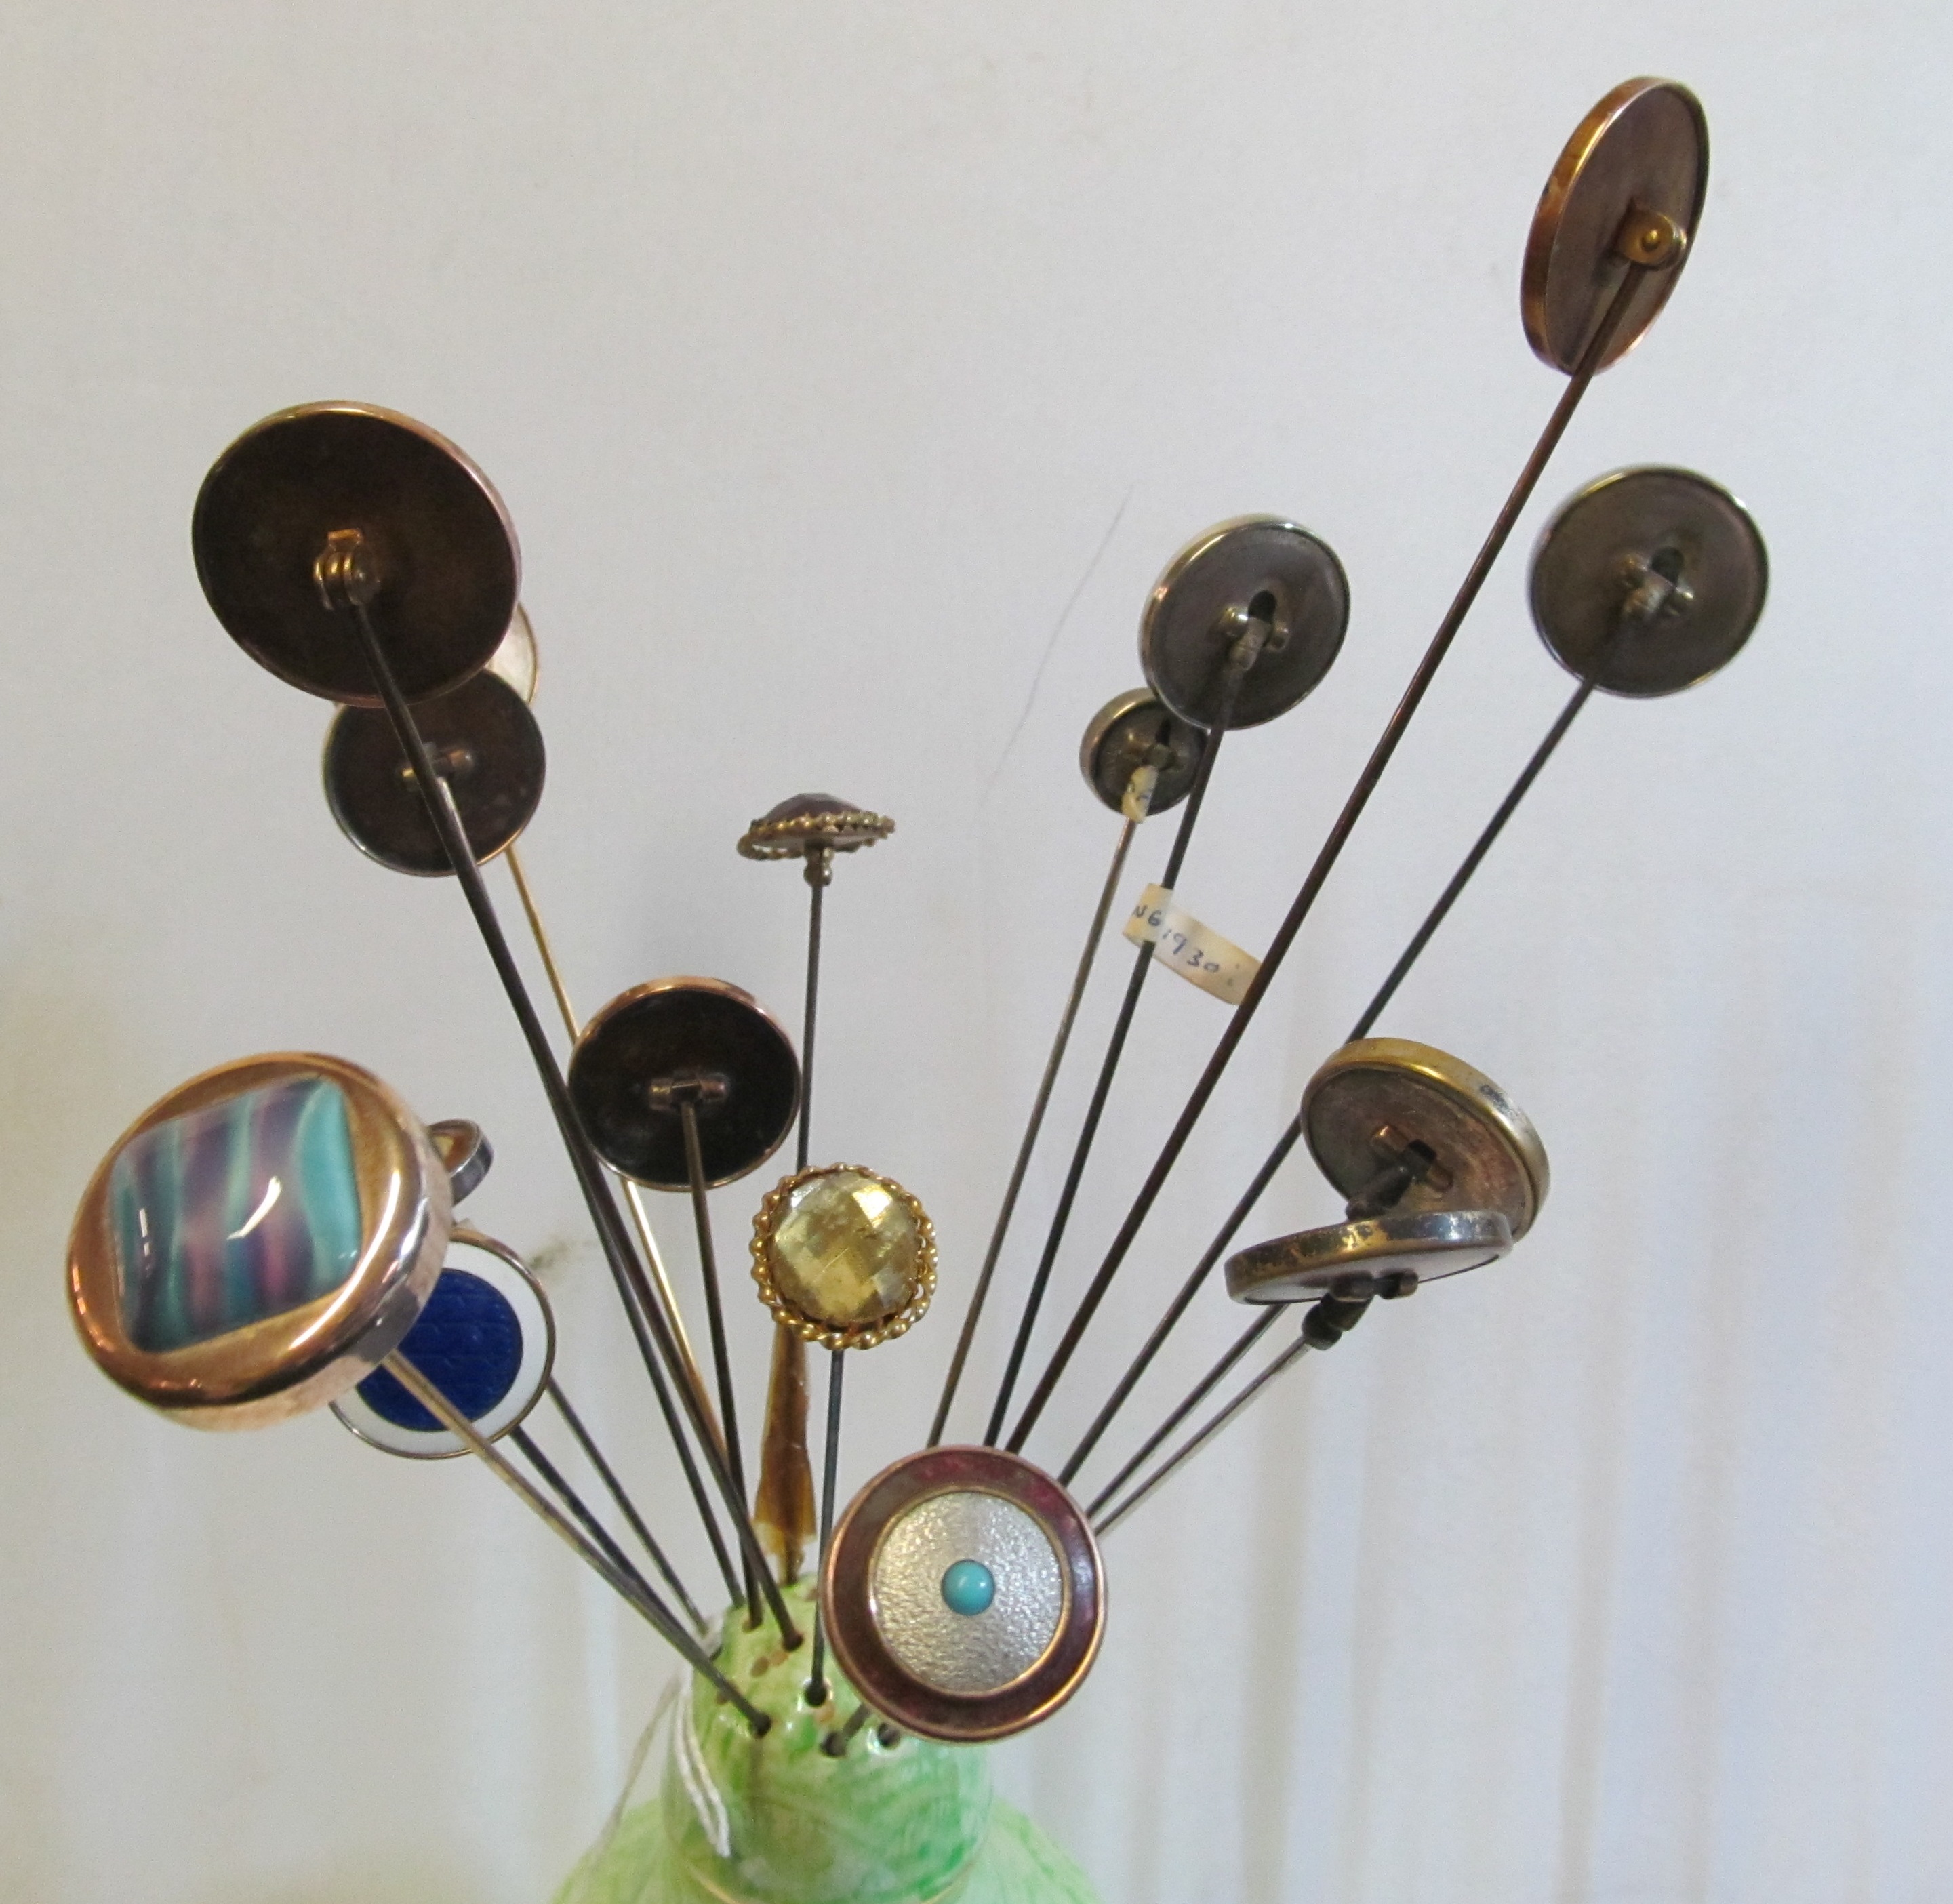 A group of hat pins with button style swivel ends in hat pin holder - Image 2 of 2